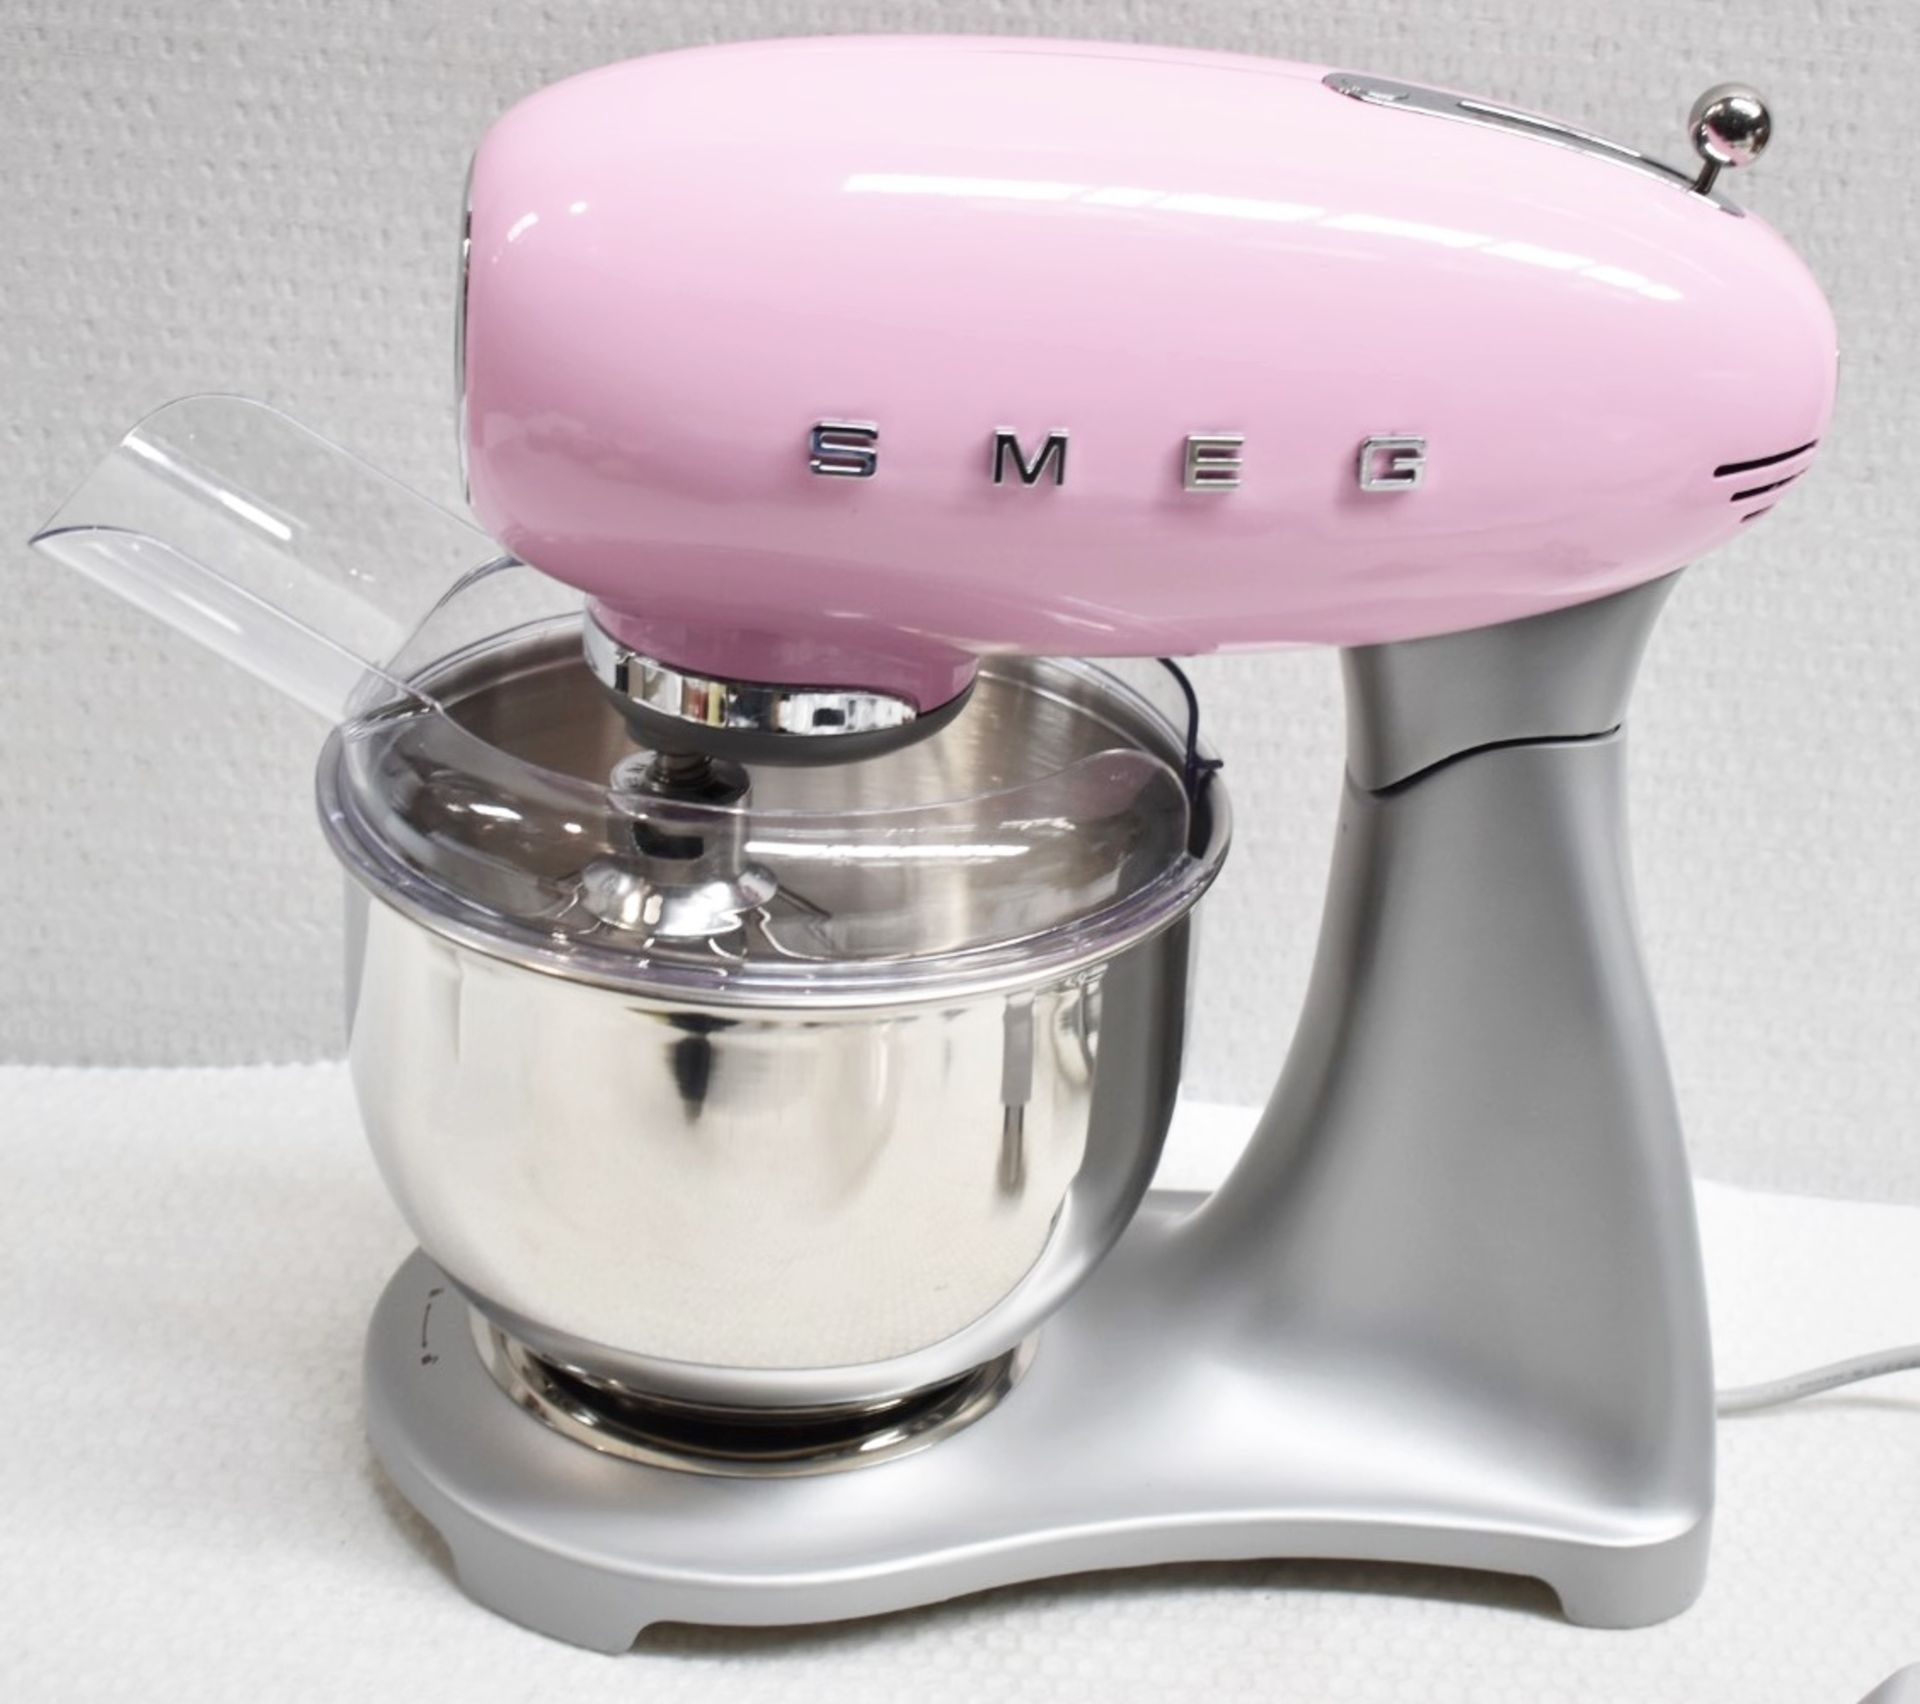 1 x SMEG 50s Style Stainless Steel Stand Mixer In Pale Pink (4.8L) - Original Price £449.00 - Image 4 of 16